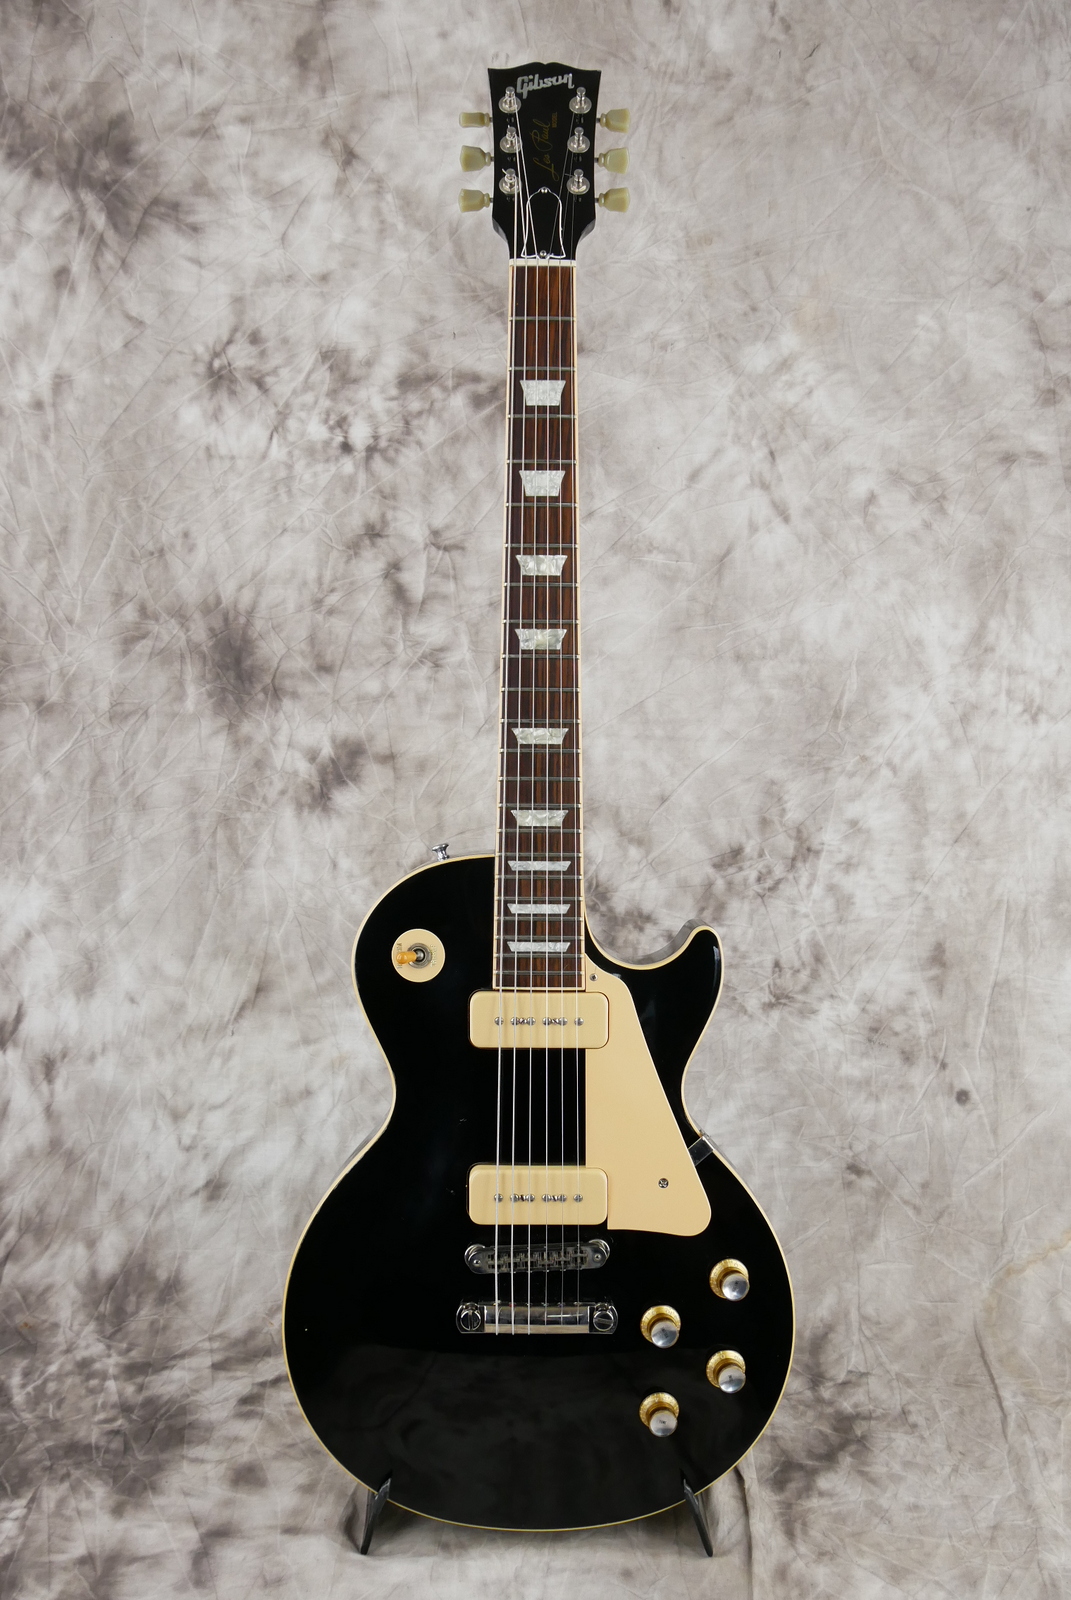 img/vintage/5337/Gibson_Les_Paul_Deluxe_limited_edtion_black_2000-001.JPG